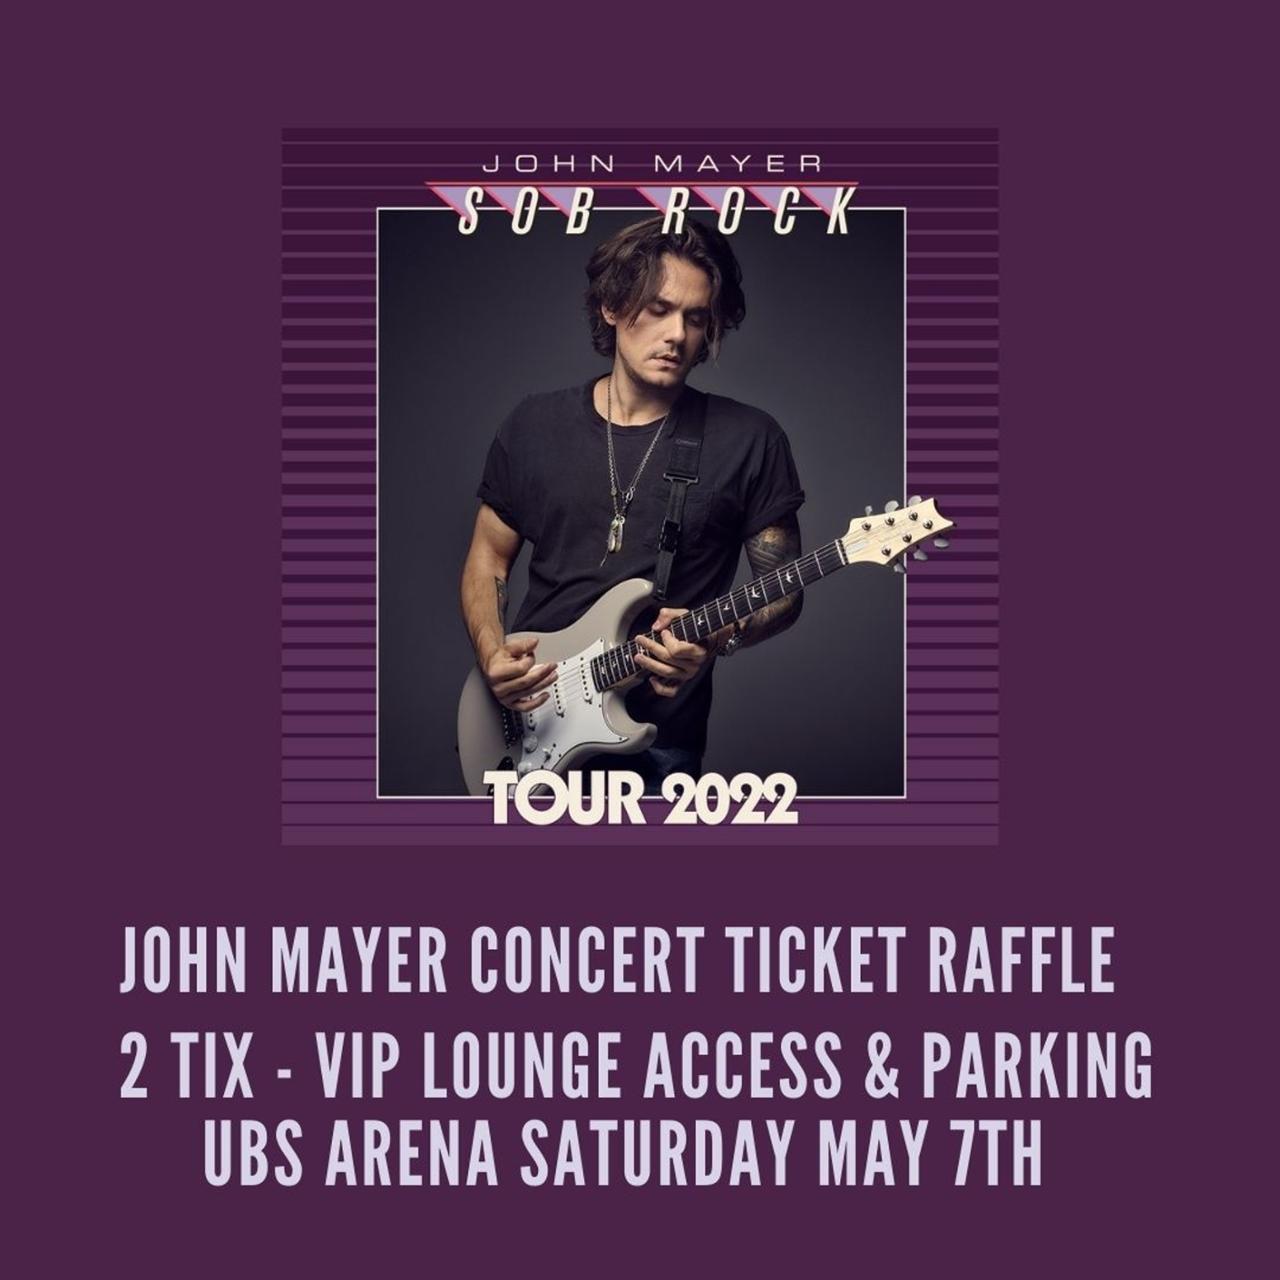 **John Mayer Concert Tickets** Powered by Givergy